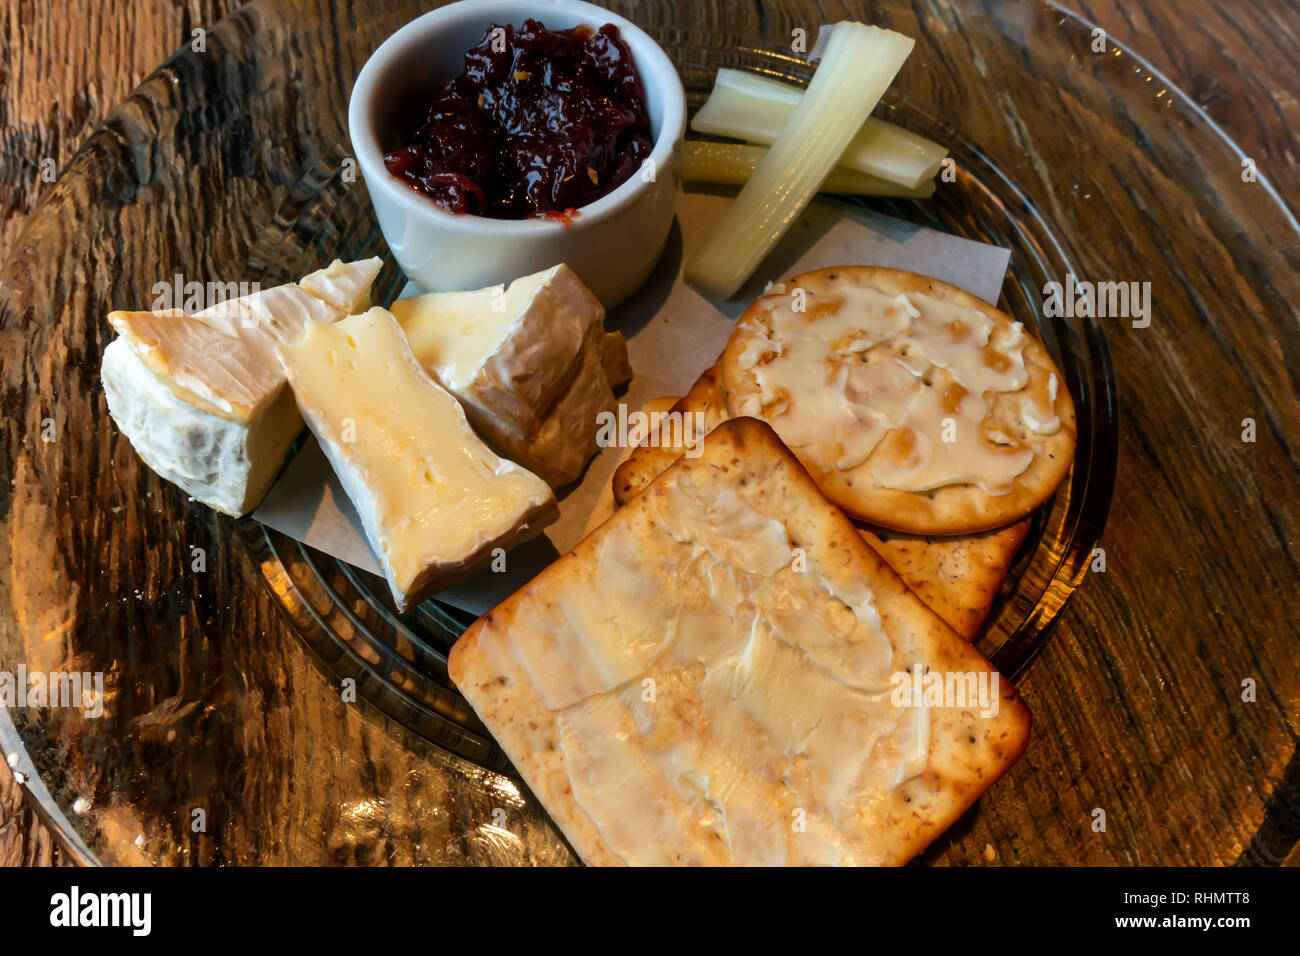 Camembert Cheese buttered biscuits celery and pickle served on a glass plate Stock Photo